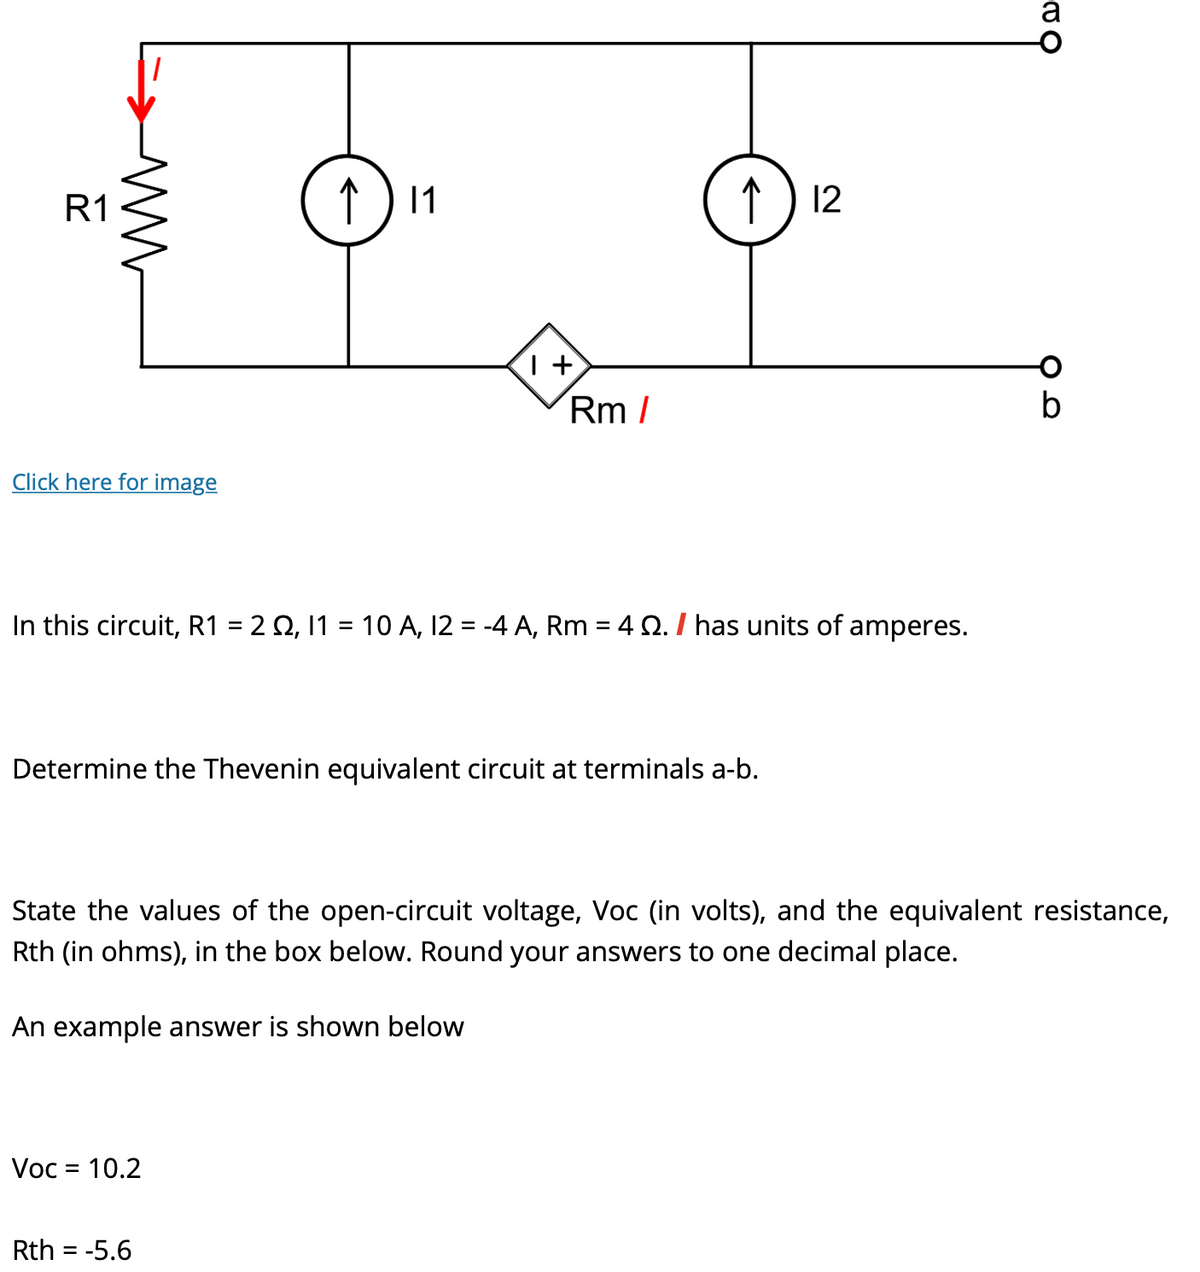 R1
ww
Click here for image
个
↑ 11
1+
Voc = 10.2
Rm/
In this circuit, R1 = 2 22, I1 = 10 A, 12 = -4 A, Rm = 4 22. / has units of amperes.
Rth = -5.6
↑ 12
Determine the Thevenin equivalent circuit at terminals a-b.
a
State the values of the open-circuit voltage, Voc (in volts), and the equivalent resistance,
Rth (in ohms), in the box below. Round your answers to one decimal place.
An example answer is shown below
b